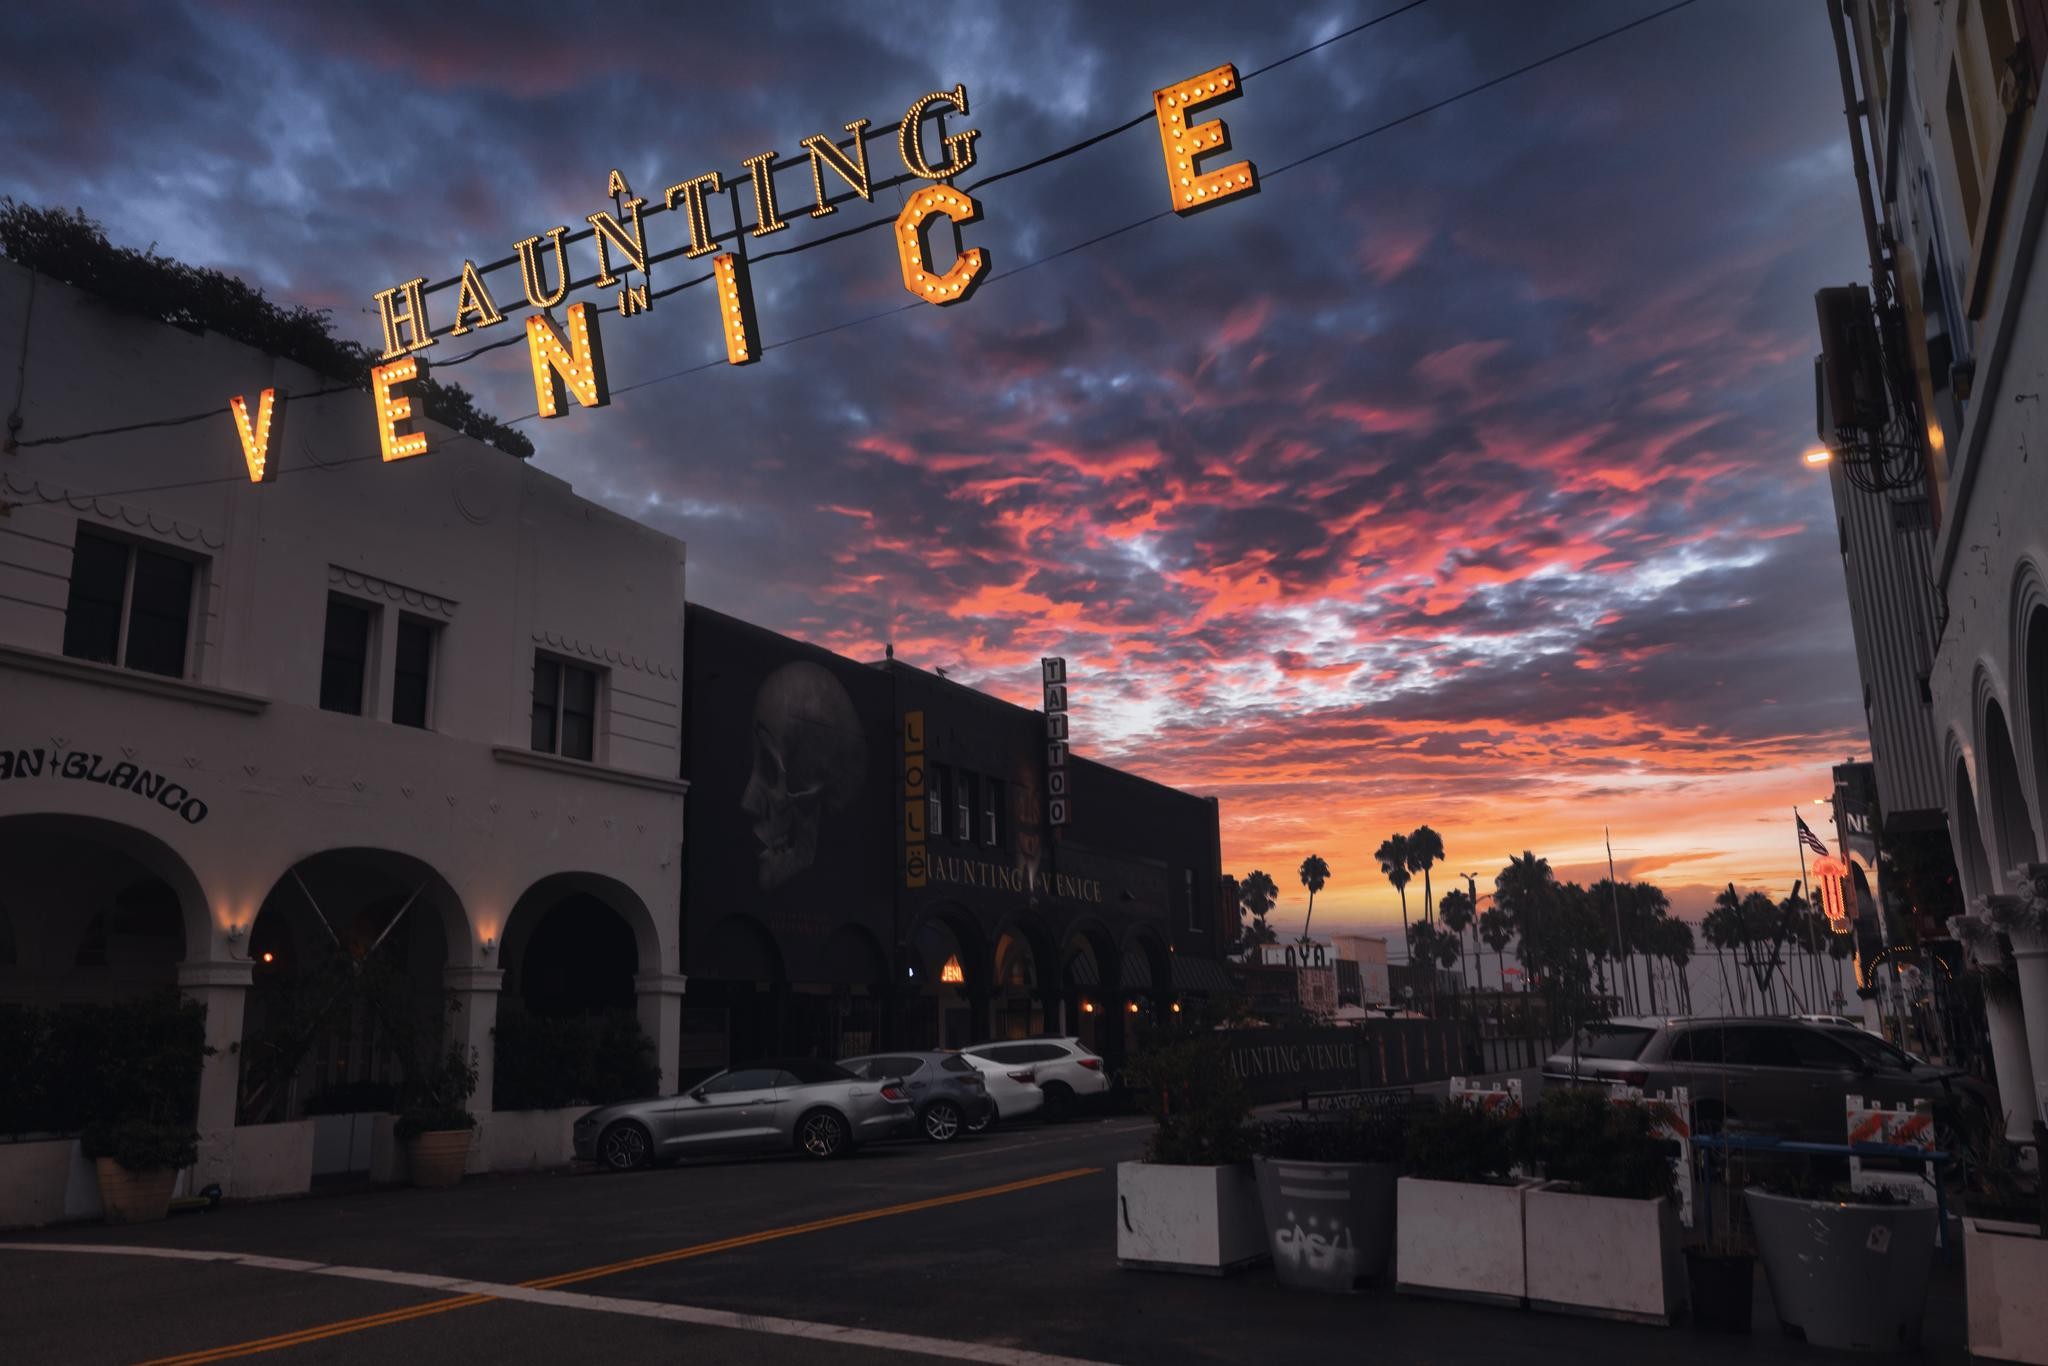 Walt Disney Studios Motion Pictures, LA & Associates, and Inwindow Outdoor for A Haunting in Venice – Venice Beach Takeover